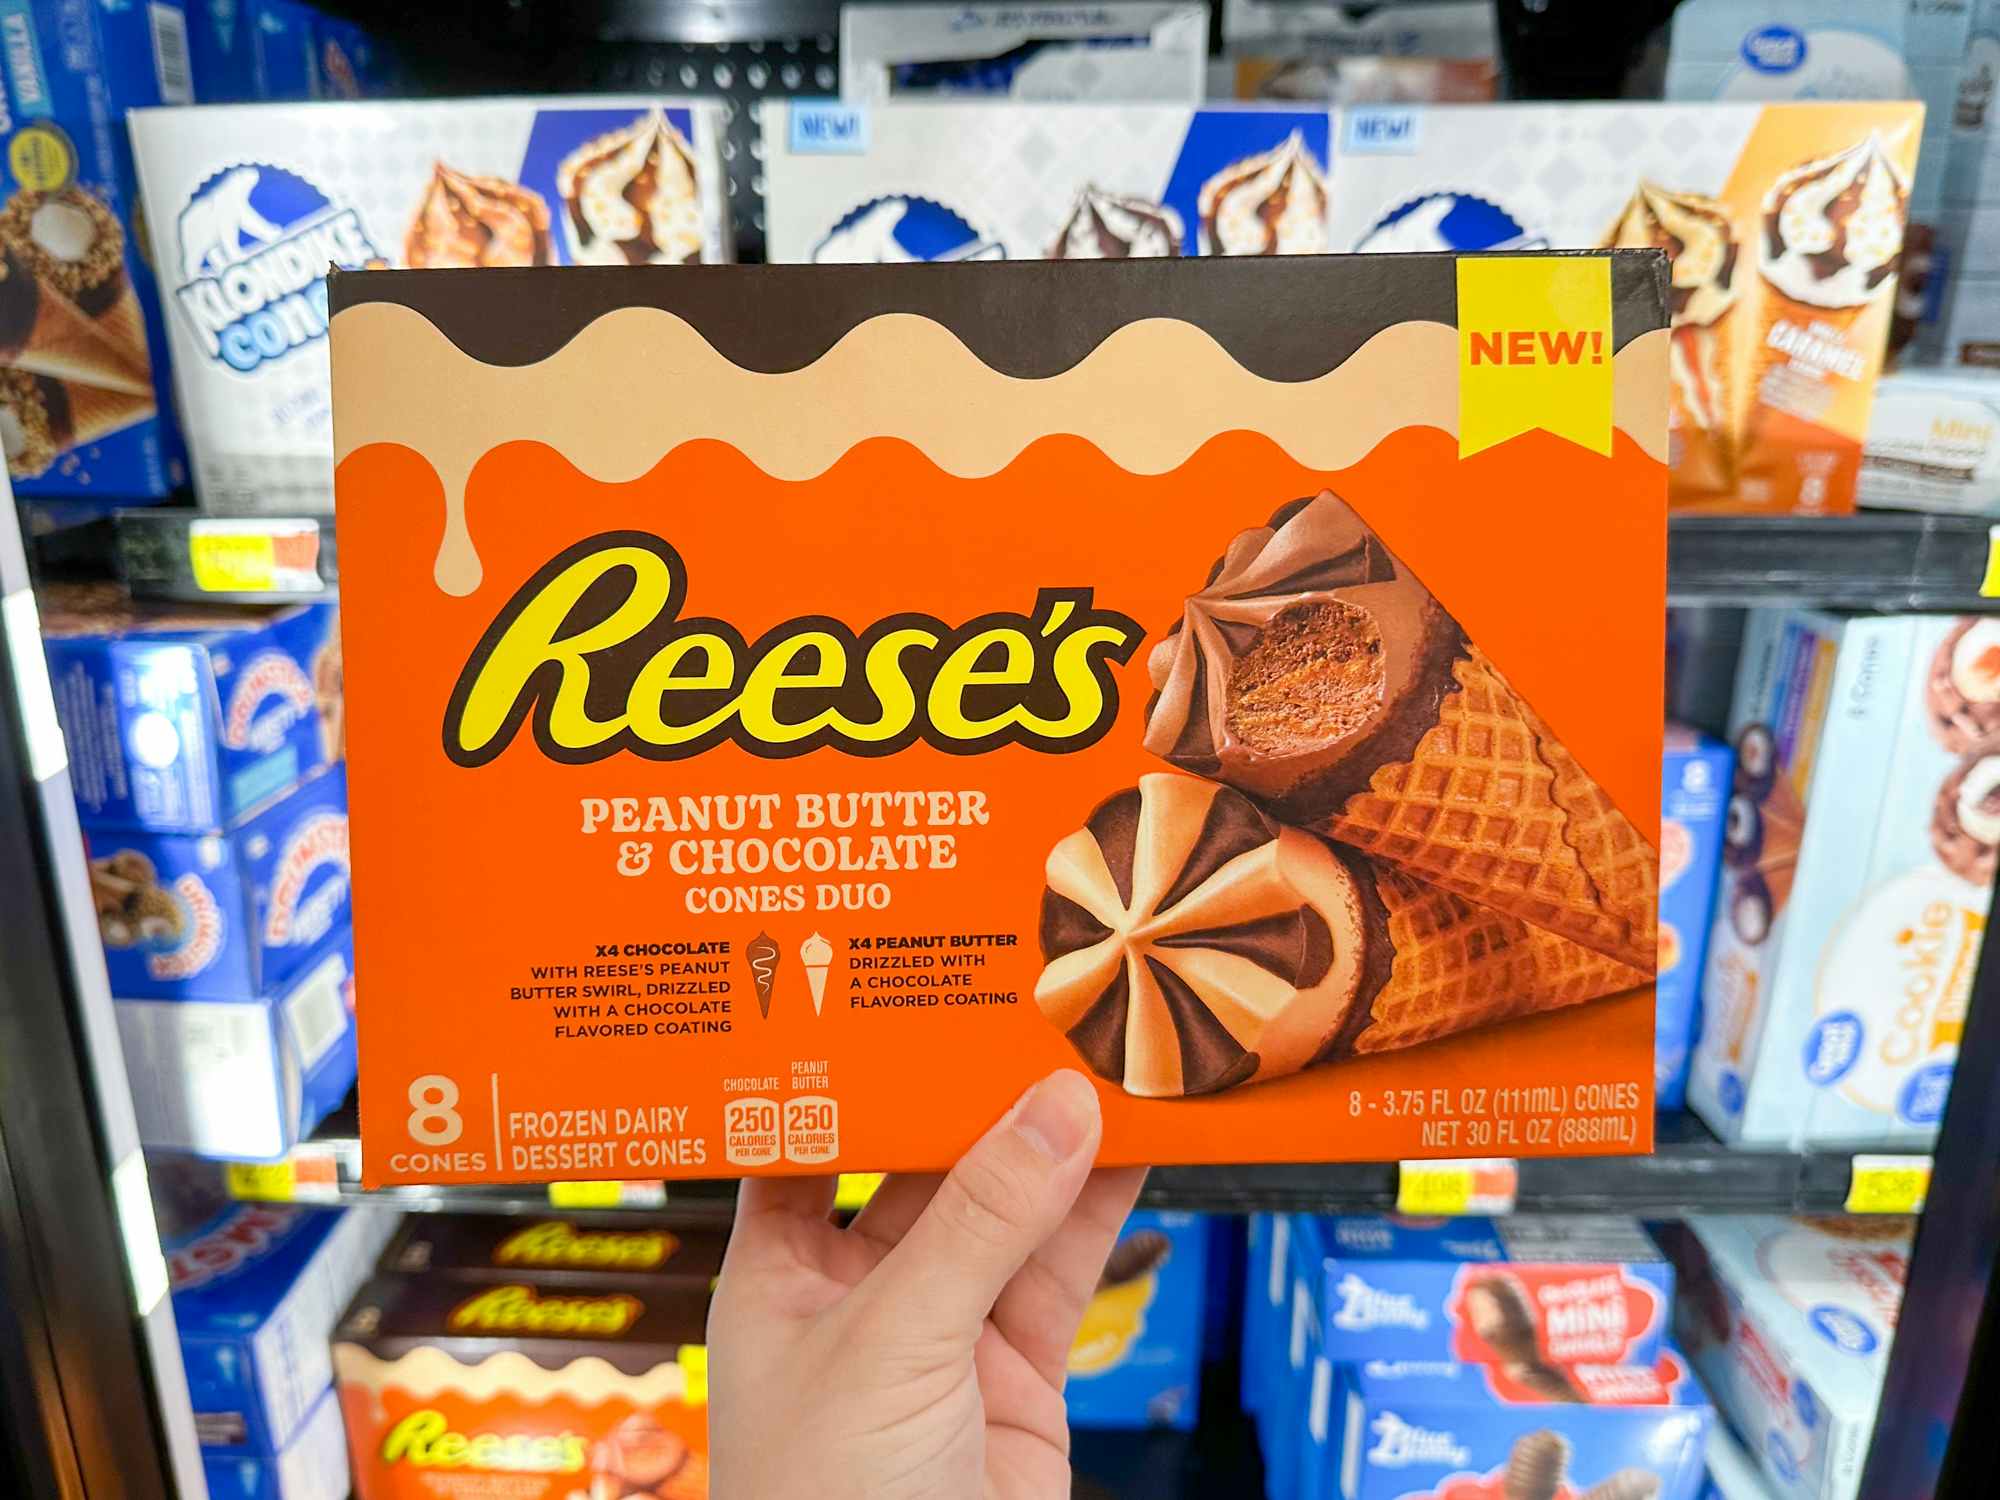 Someone holding a box of Reese's Peanut Butter Chocolate ice cream cones